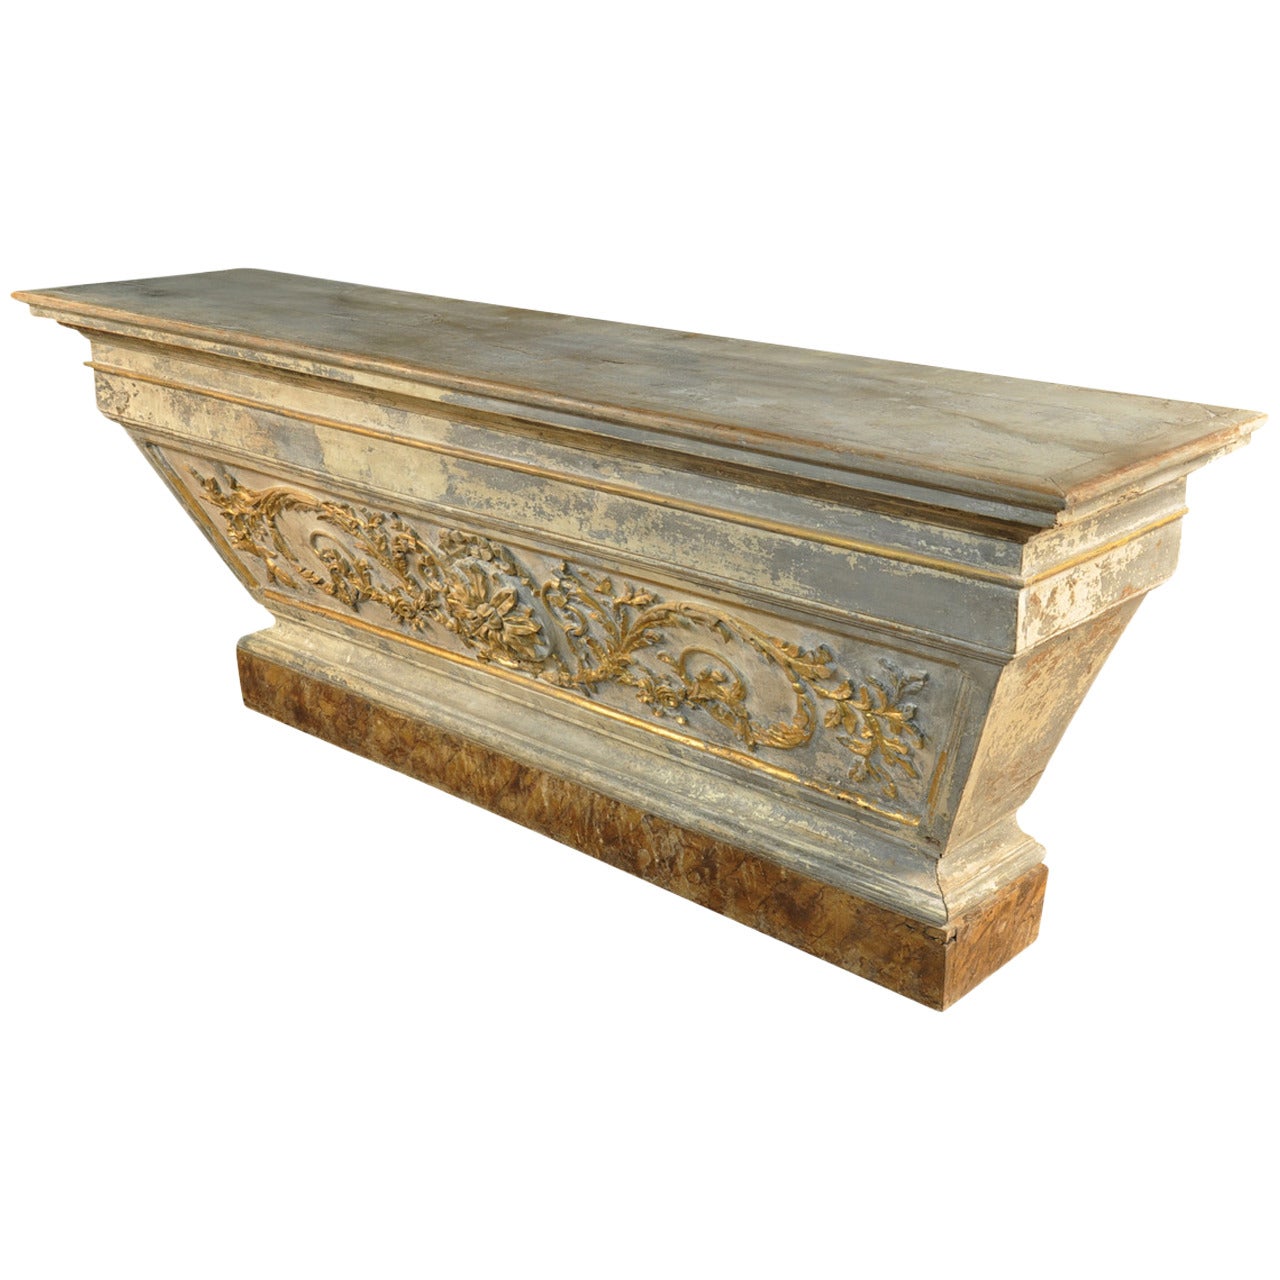 Spanish 18th Century Altar Console in Painted and Giltwood